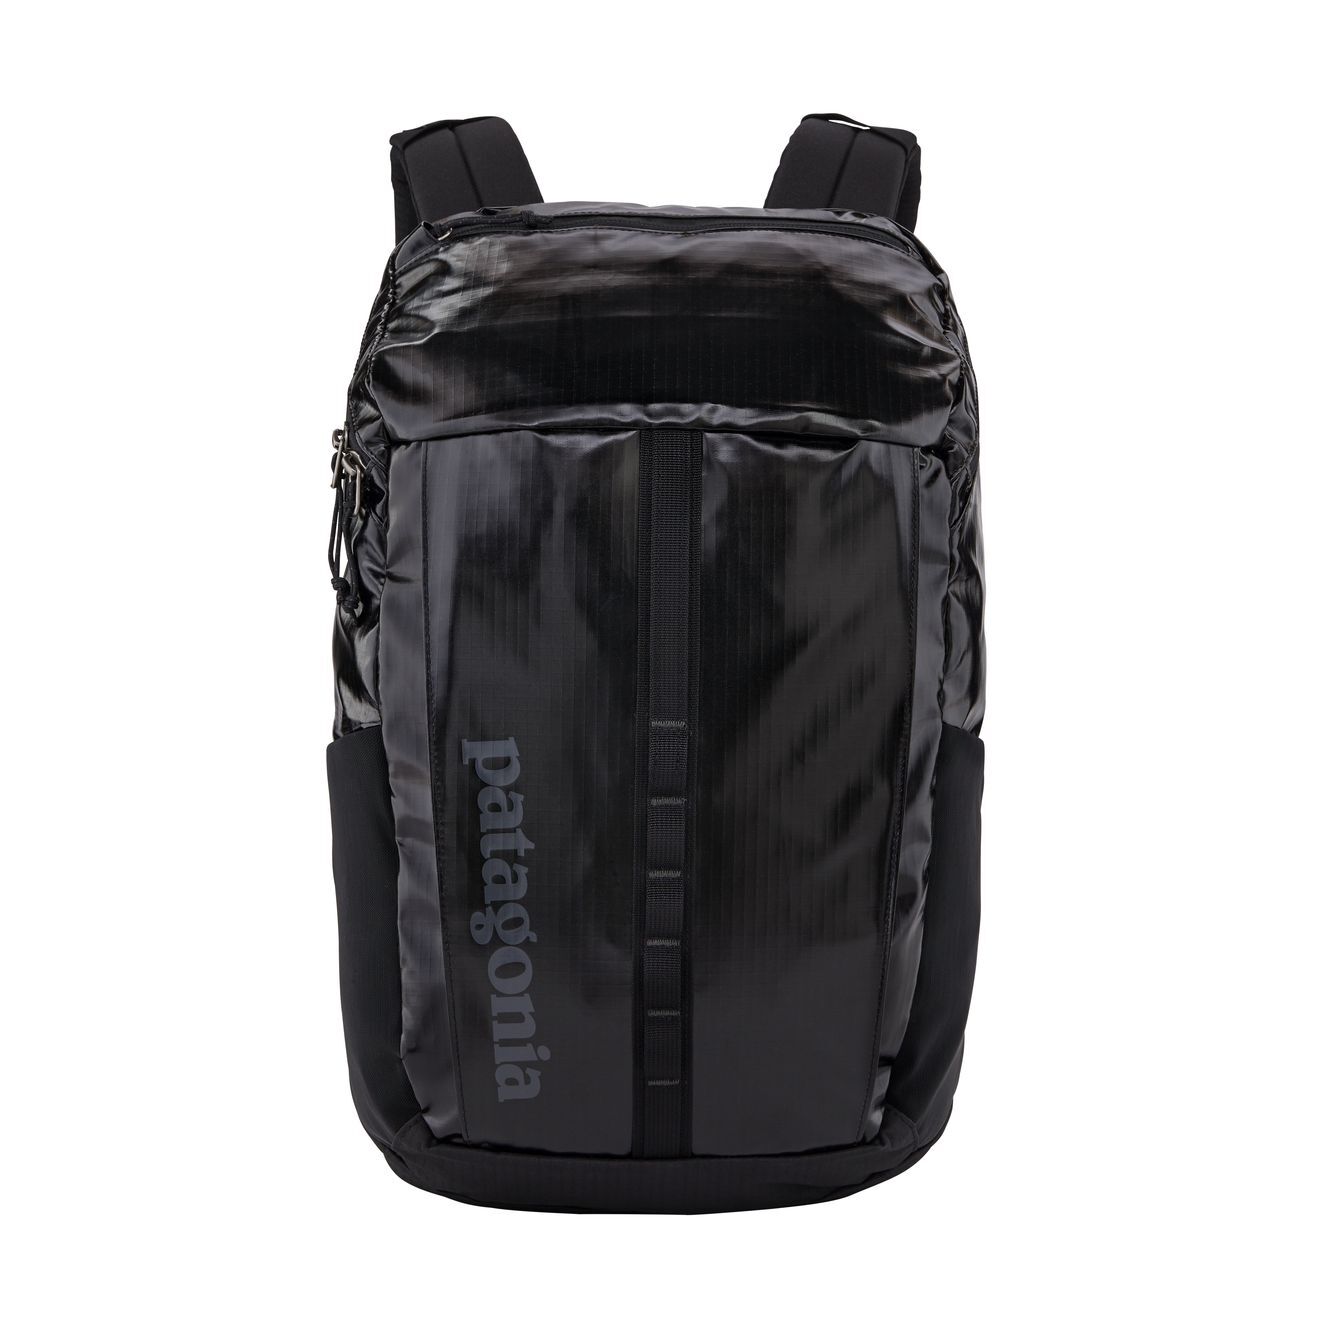 Patagonia Black Hole Pack 23L - Backpack - Women's